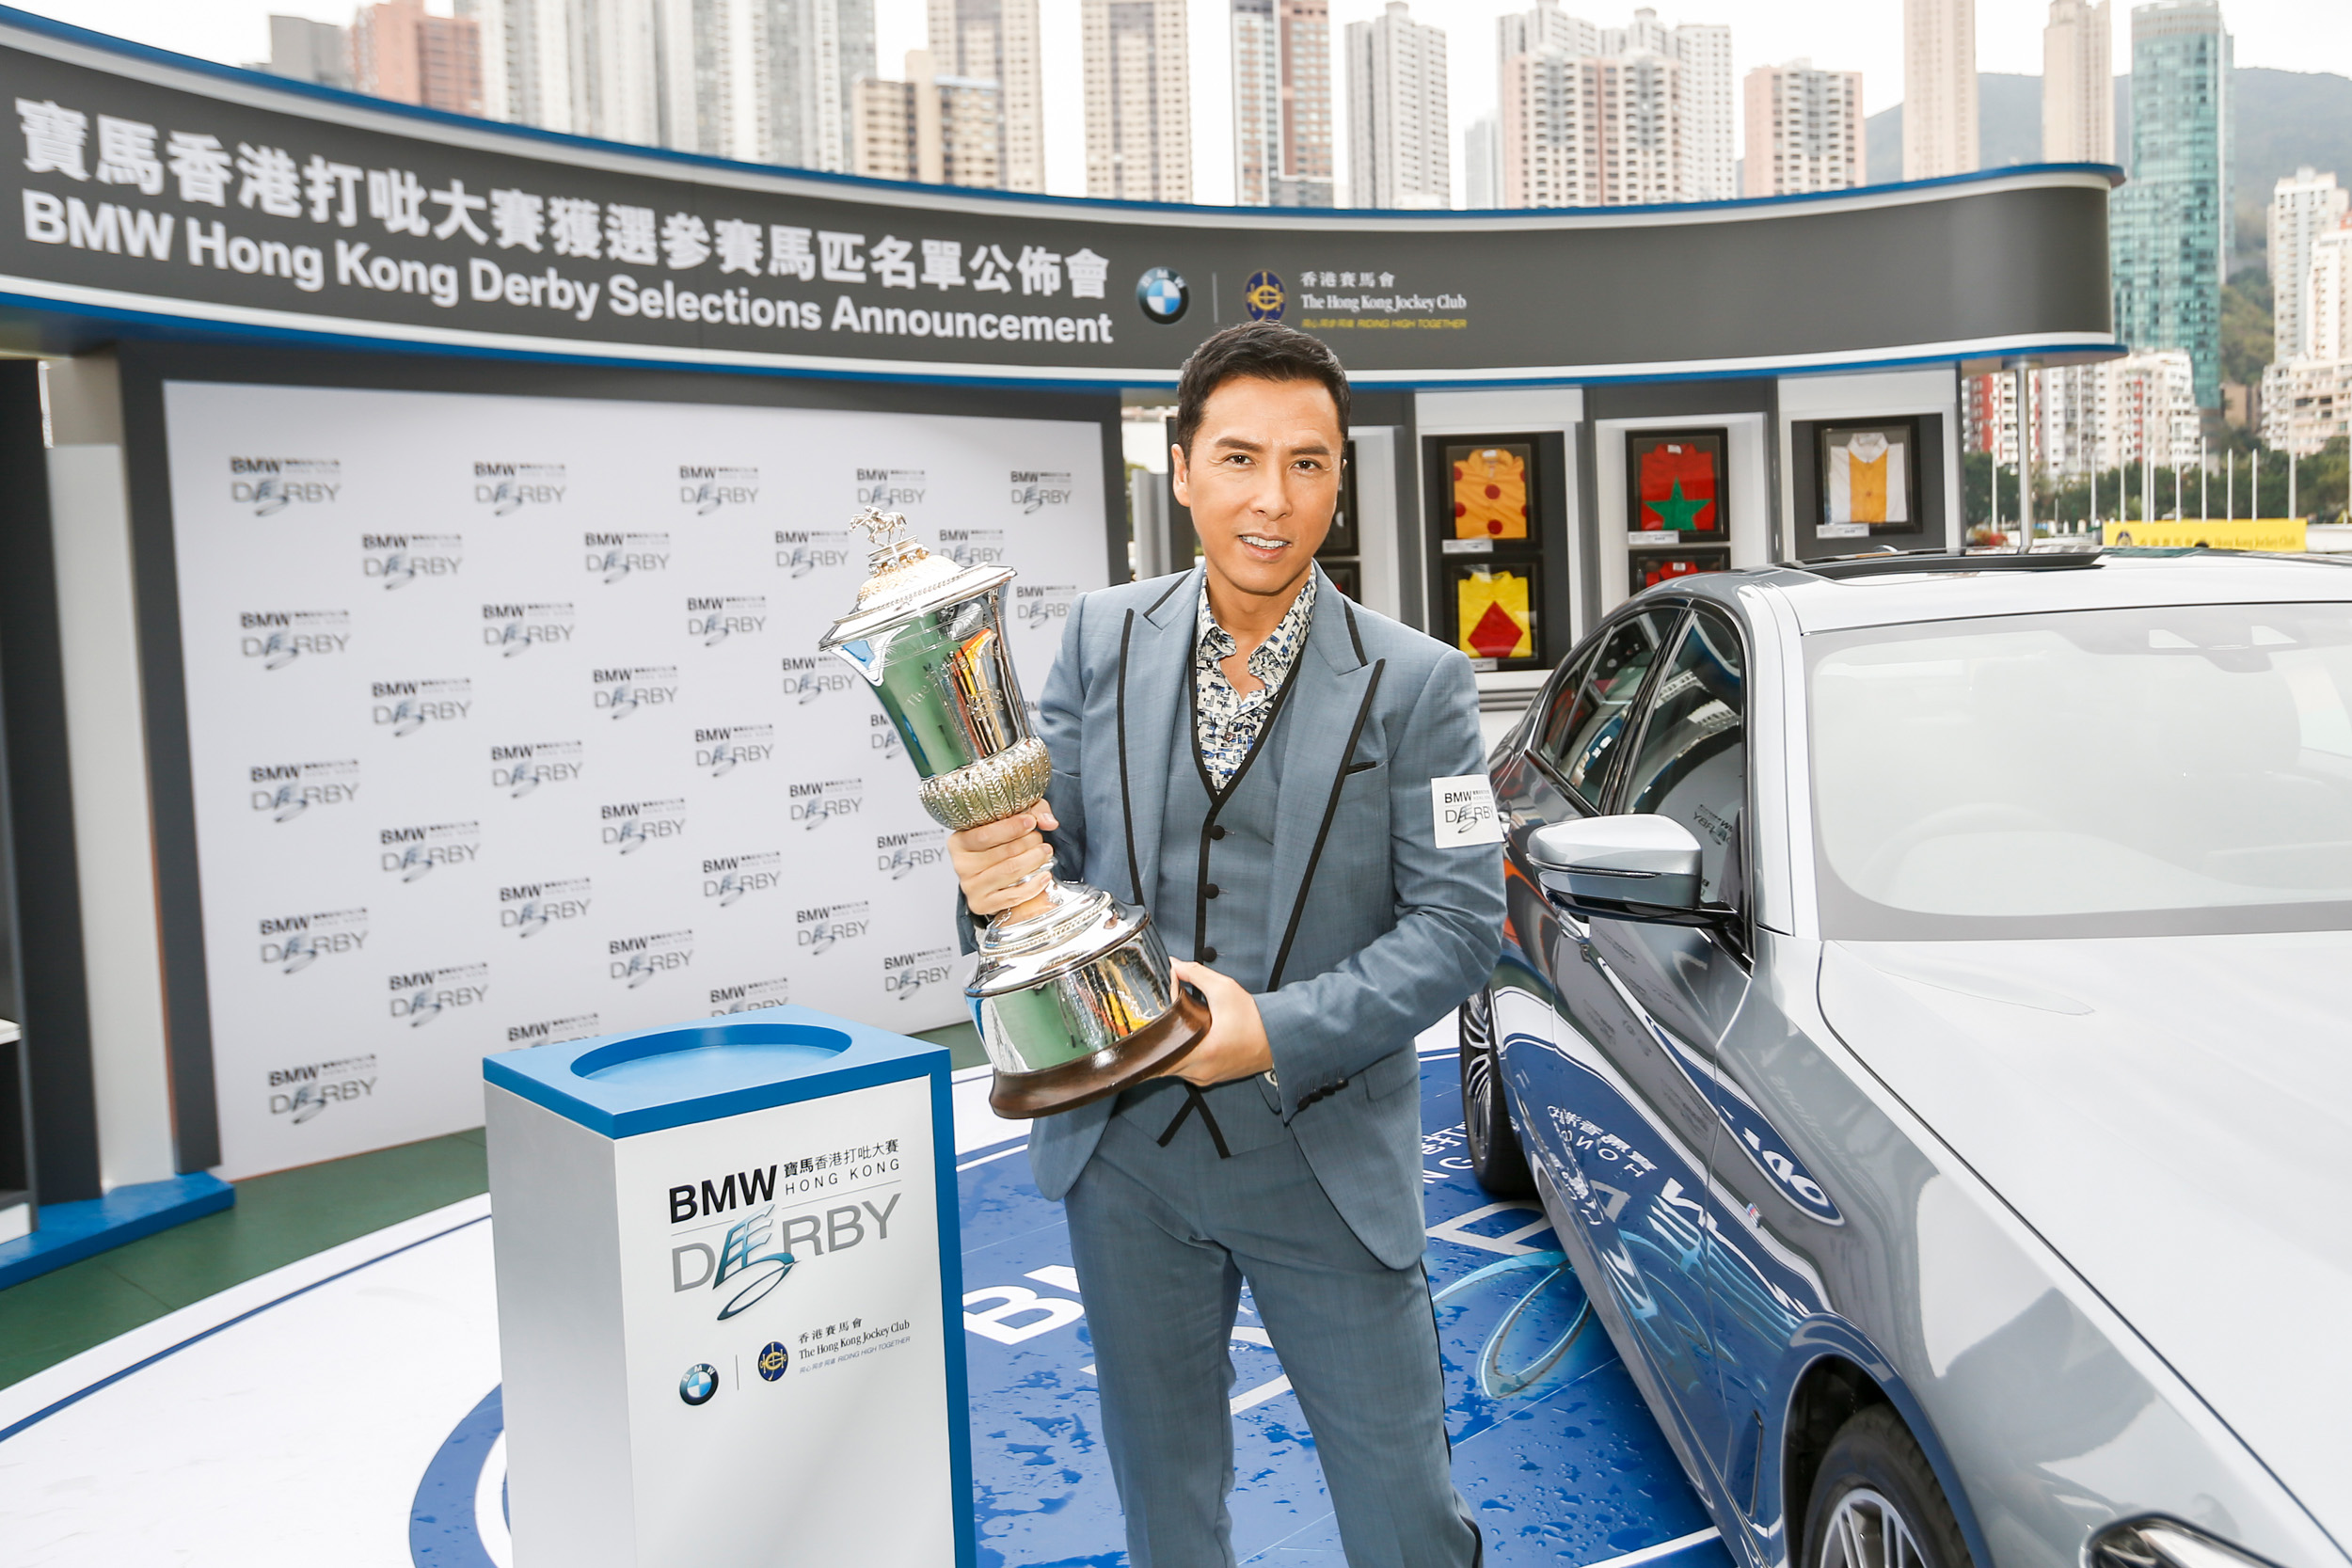 Donnie Yen is once again the BMW Hong Kong Derby’s Ambassador, a position the esteemed actor has held for five years.